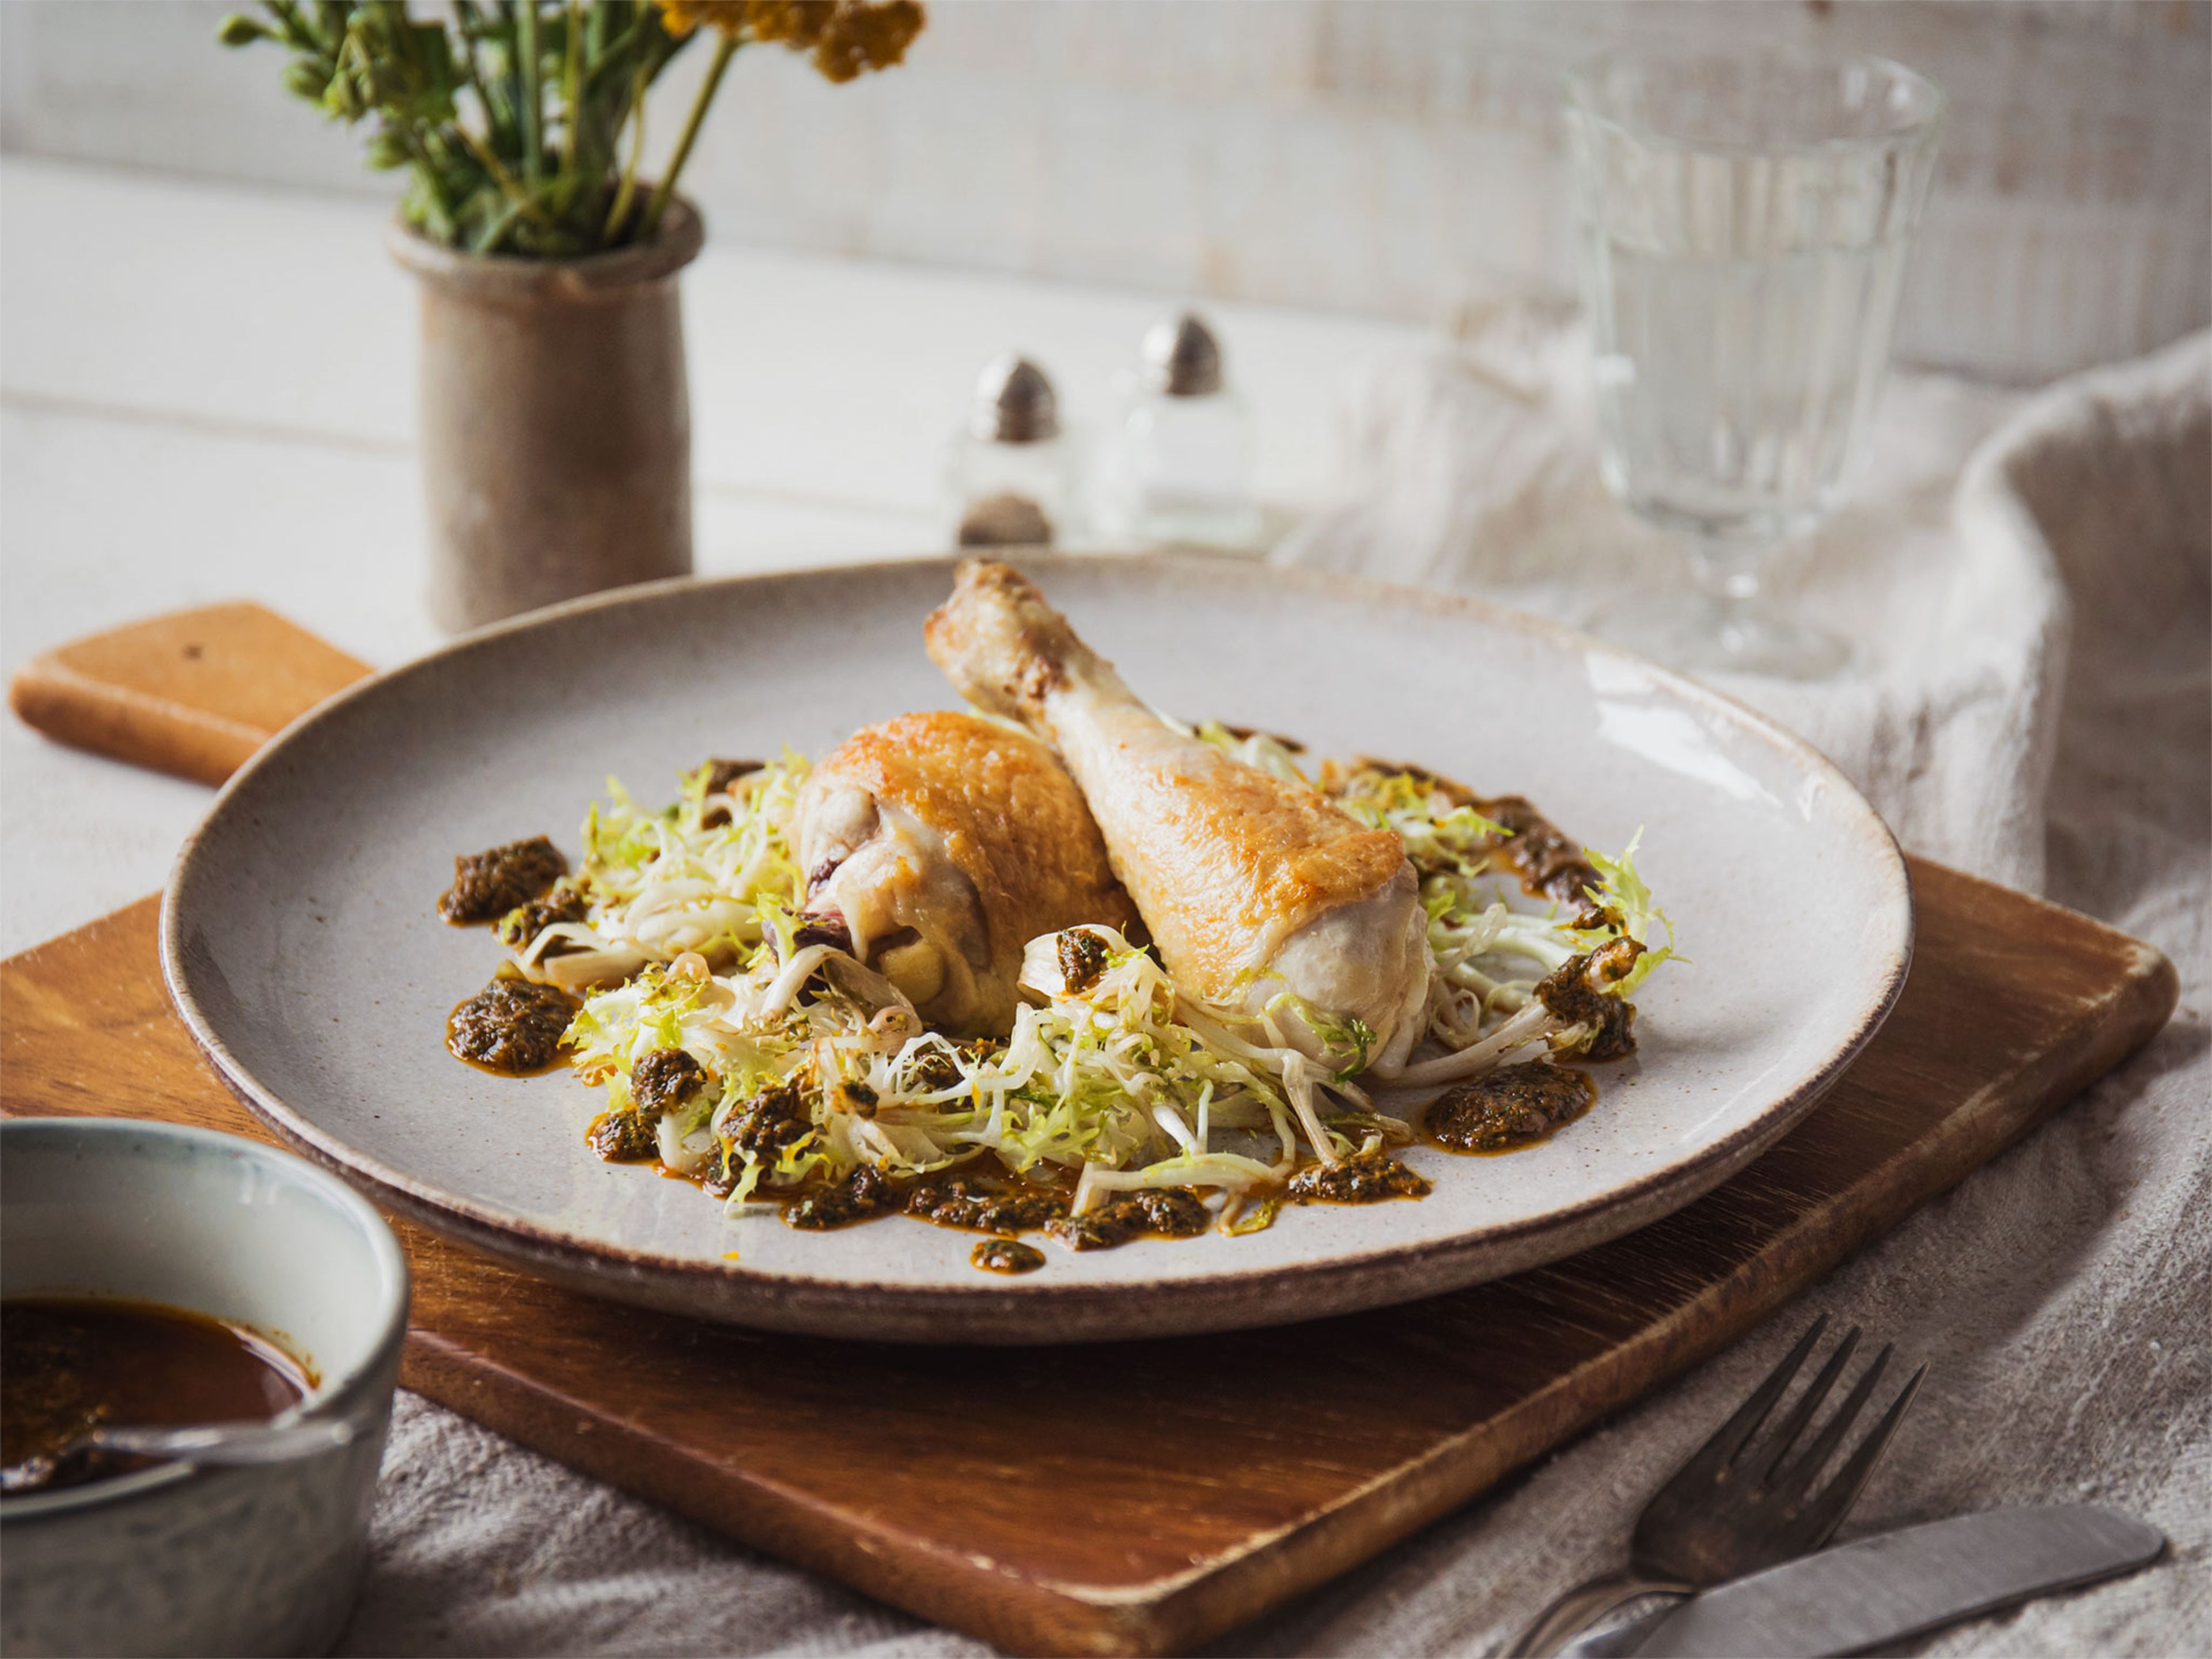 Crispy chicken with Moroccan-style sauce and frisée